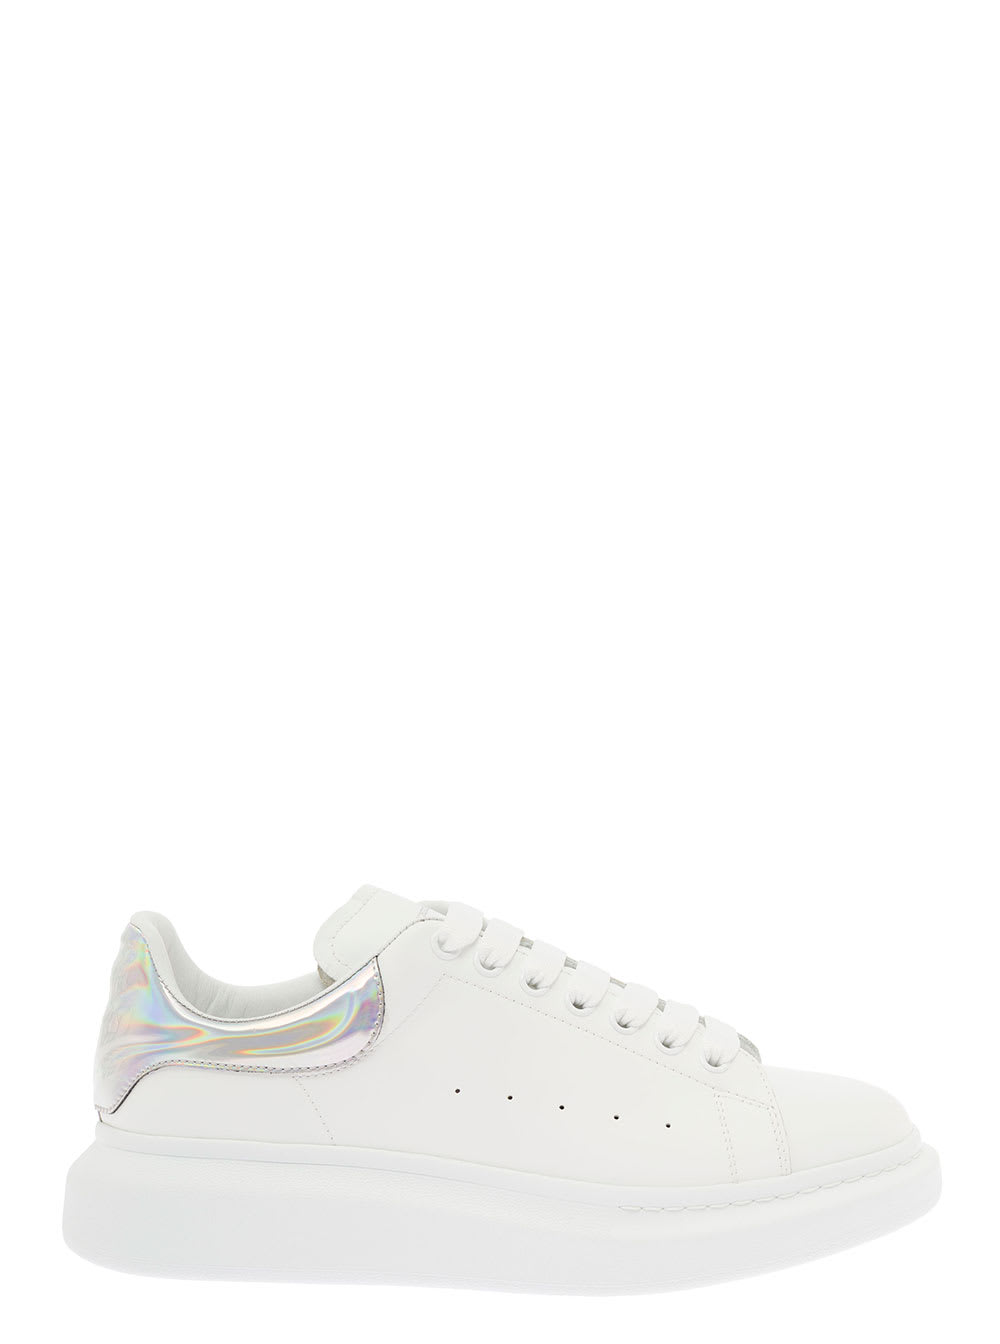 Alexander Mcqueen Mans White Leather Sneakers With Metallic Detail